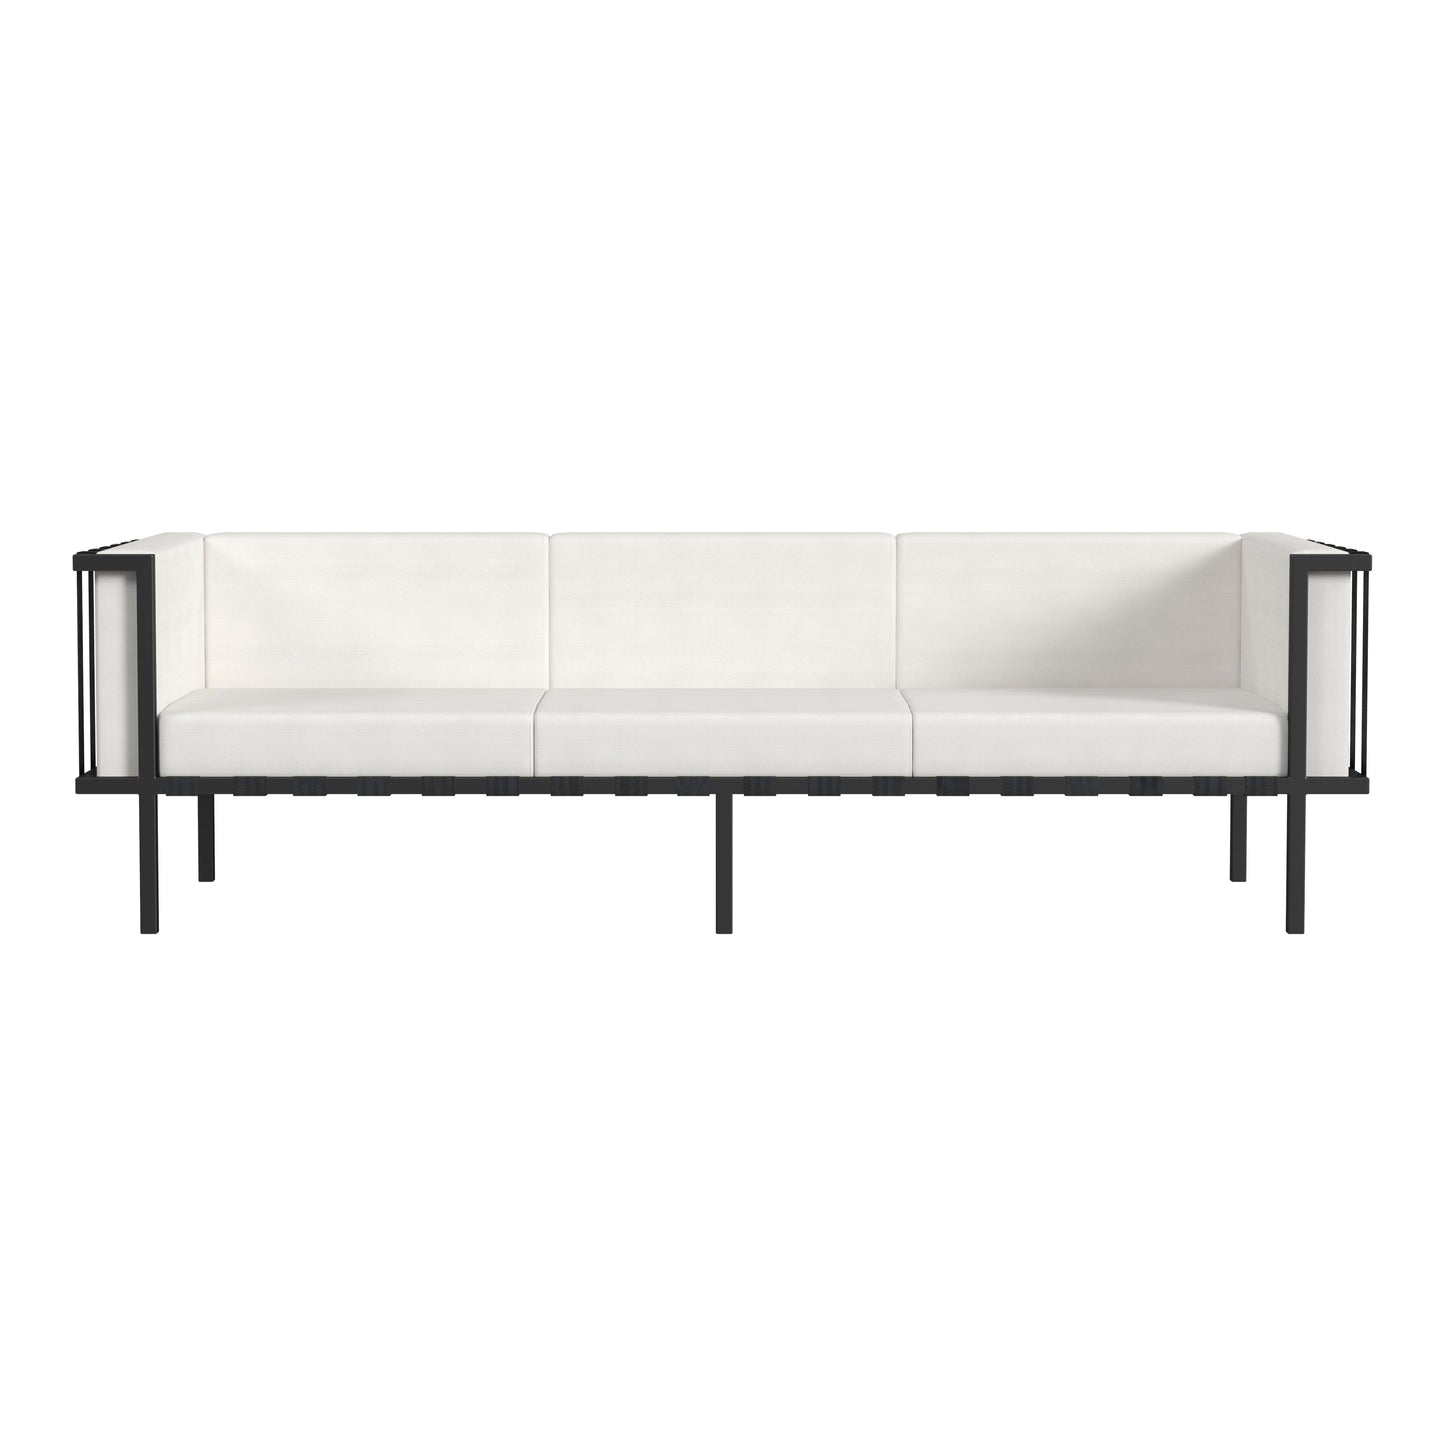 Norway Outdoor Patio Sofa with Cushions in Black and White  5722437